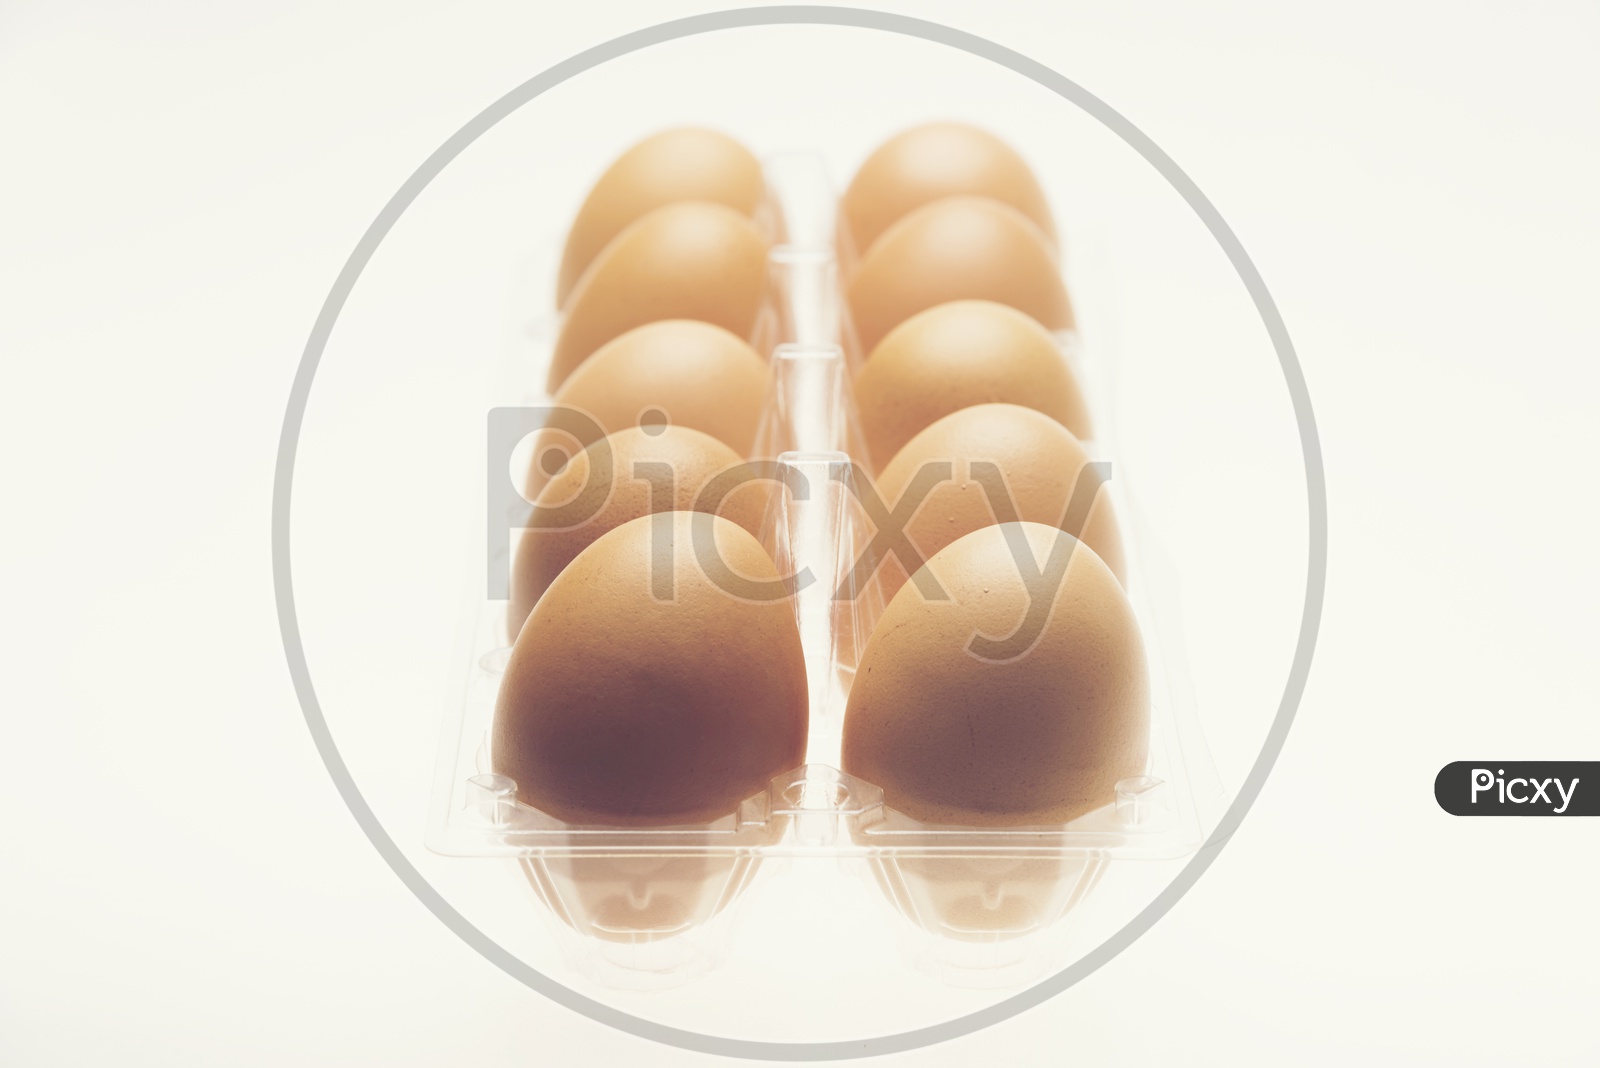 Organic brown Chicken  Eggs  in a tray On an Isolated White Background